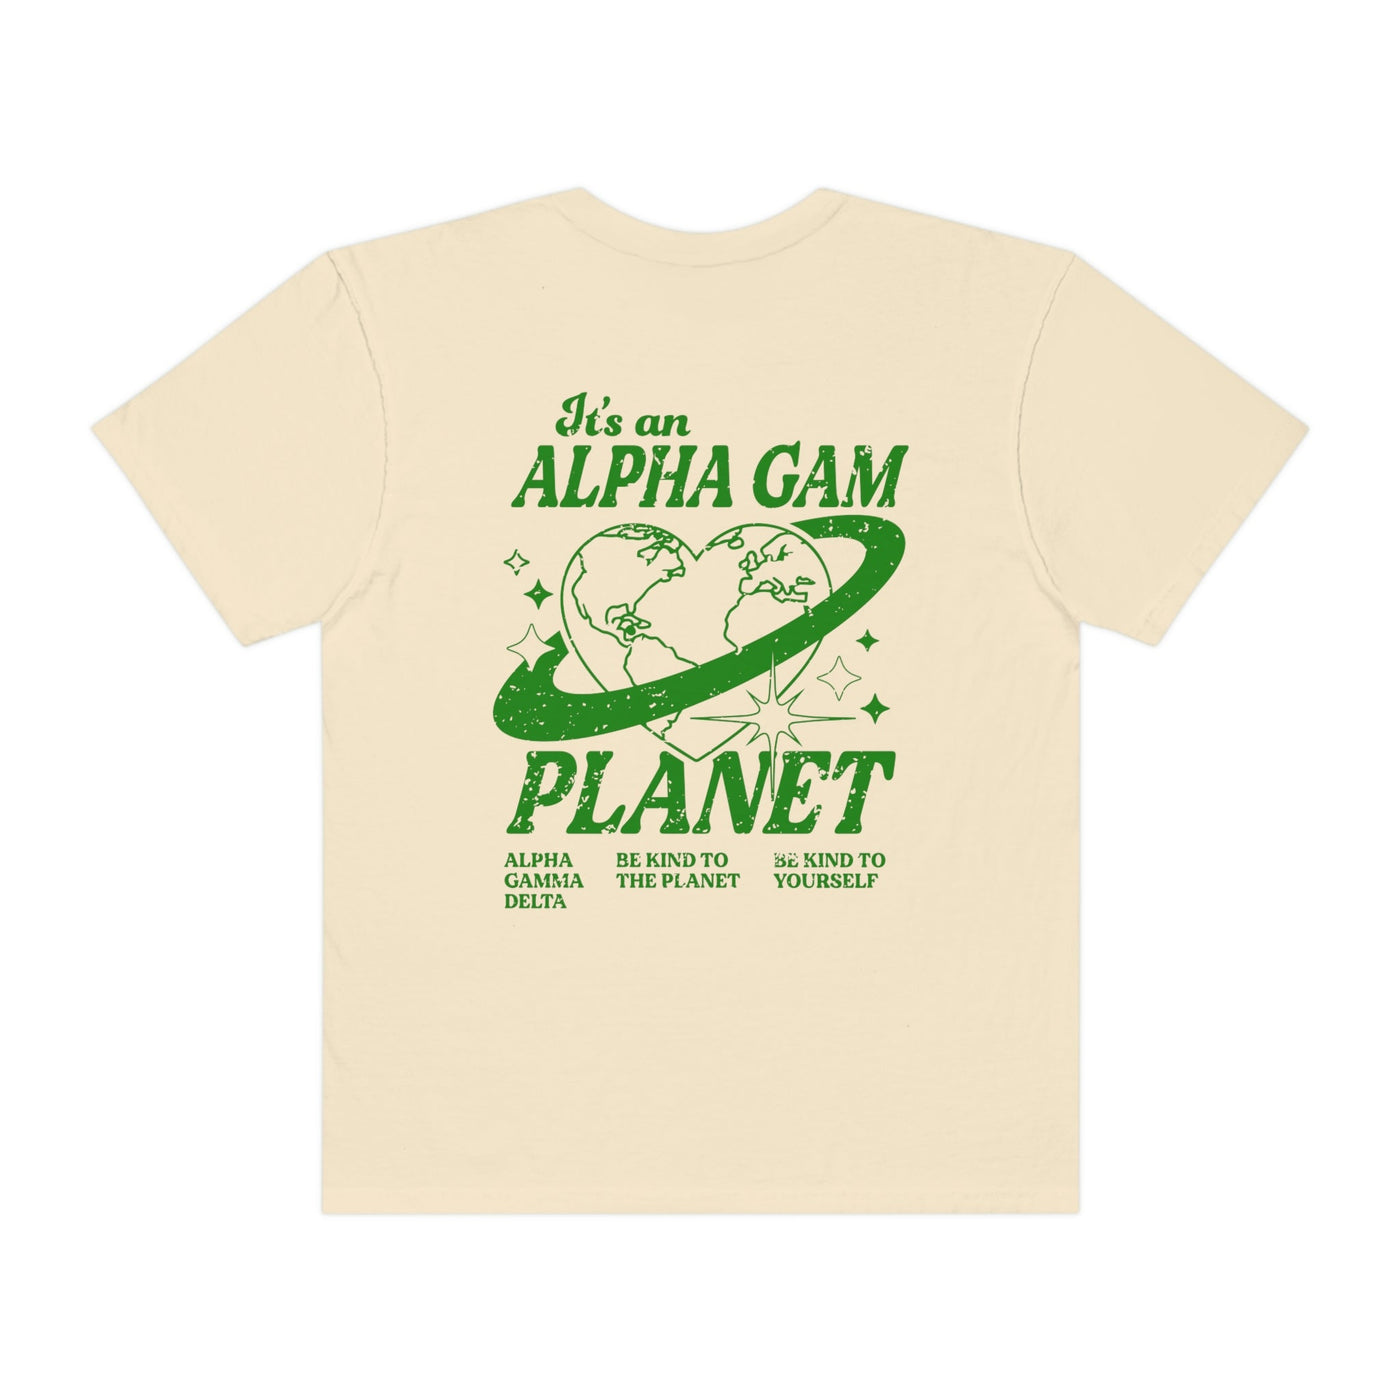 Alpha Gamma Delta Planet T-shirt | Be Kind to the Planet Trendy Sorority shirt